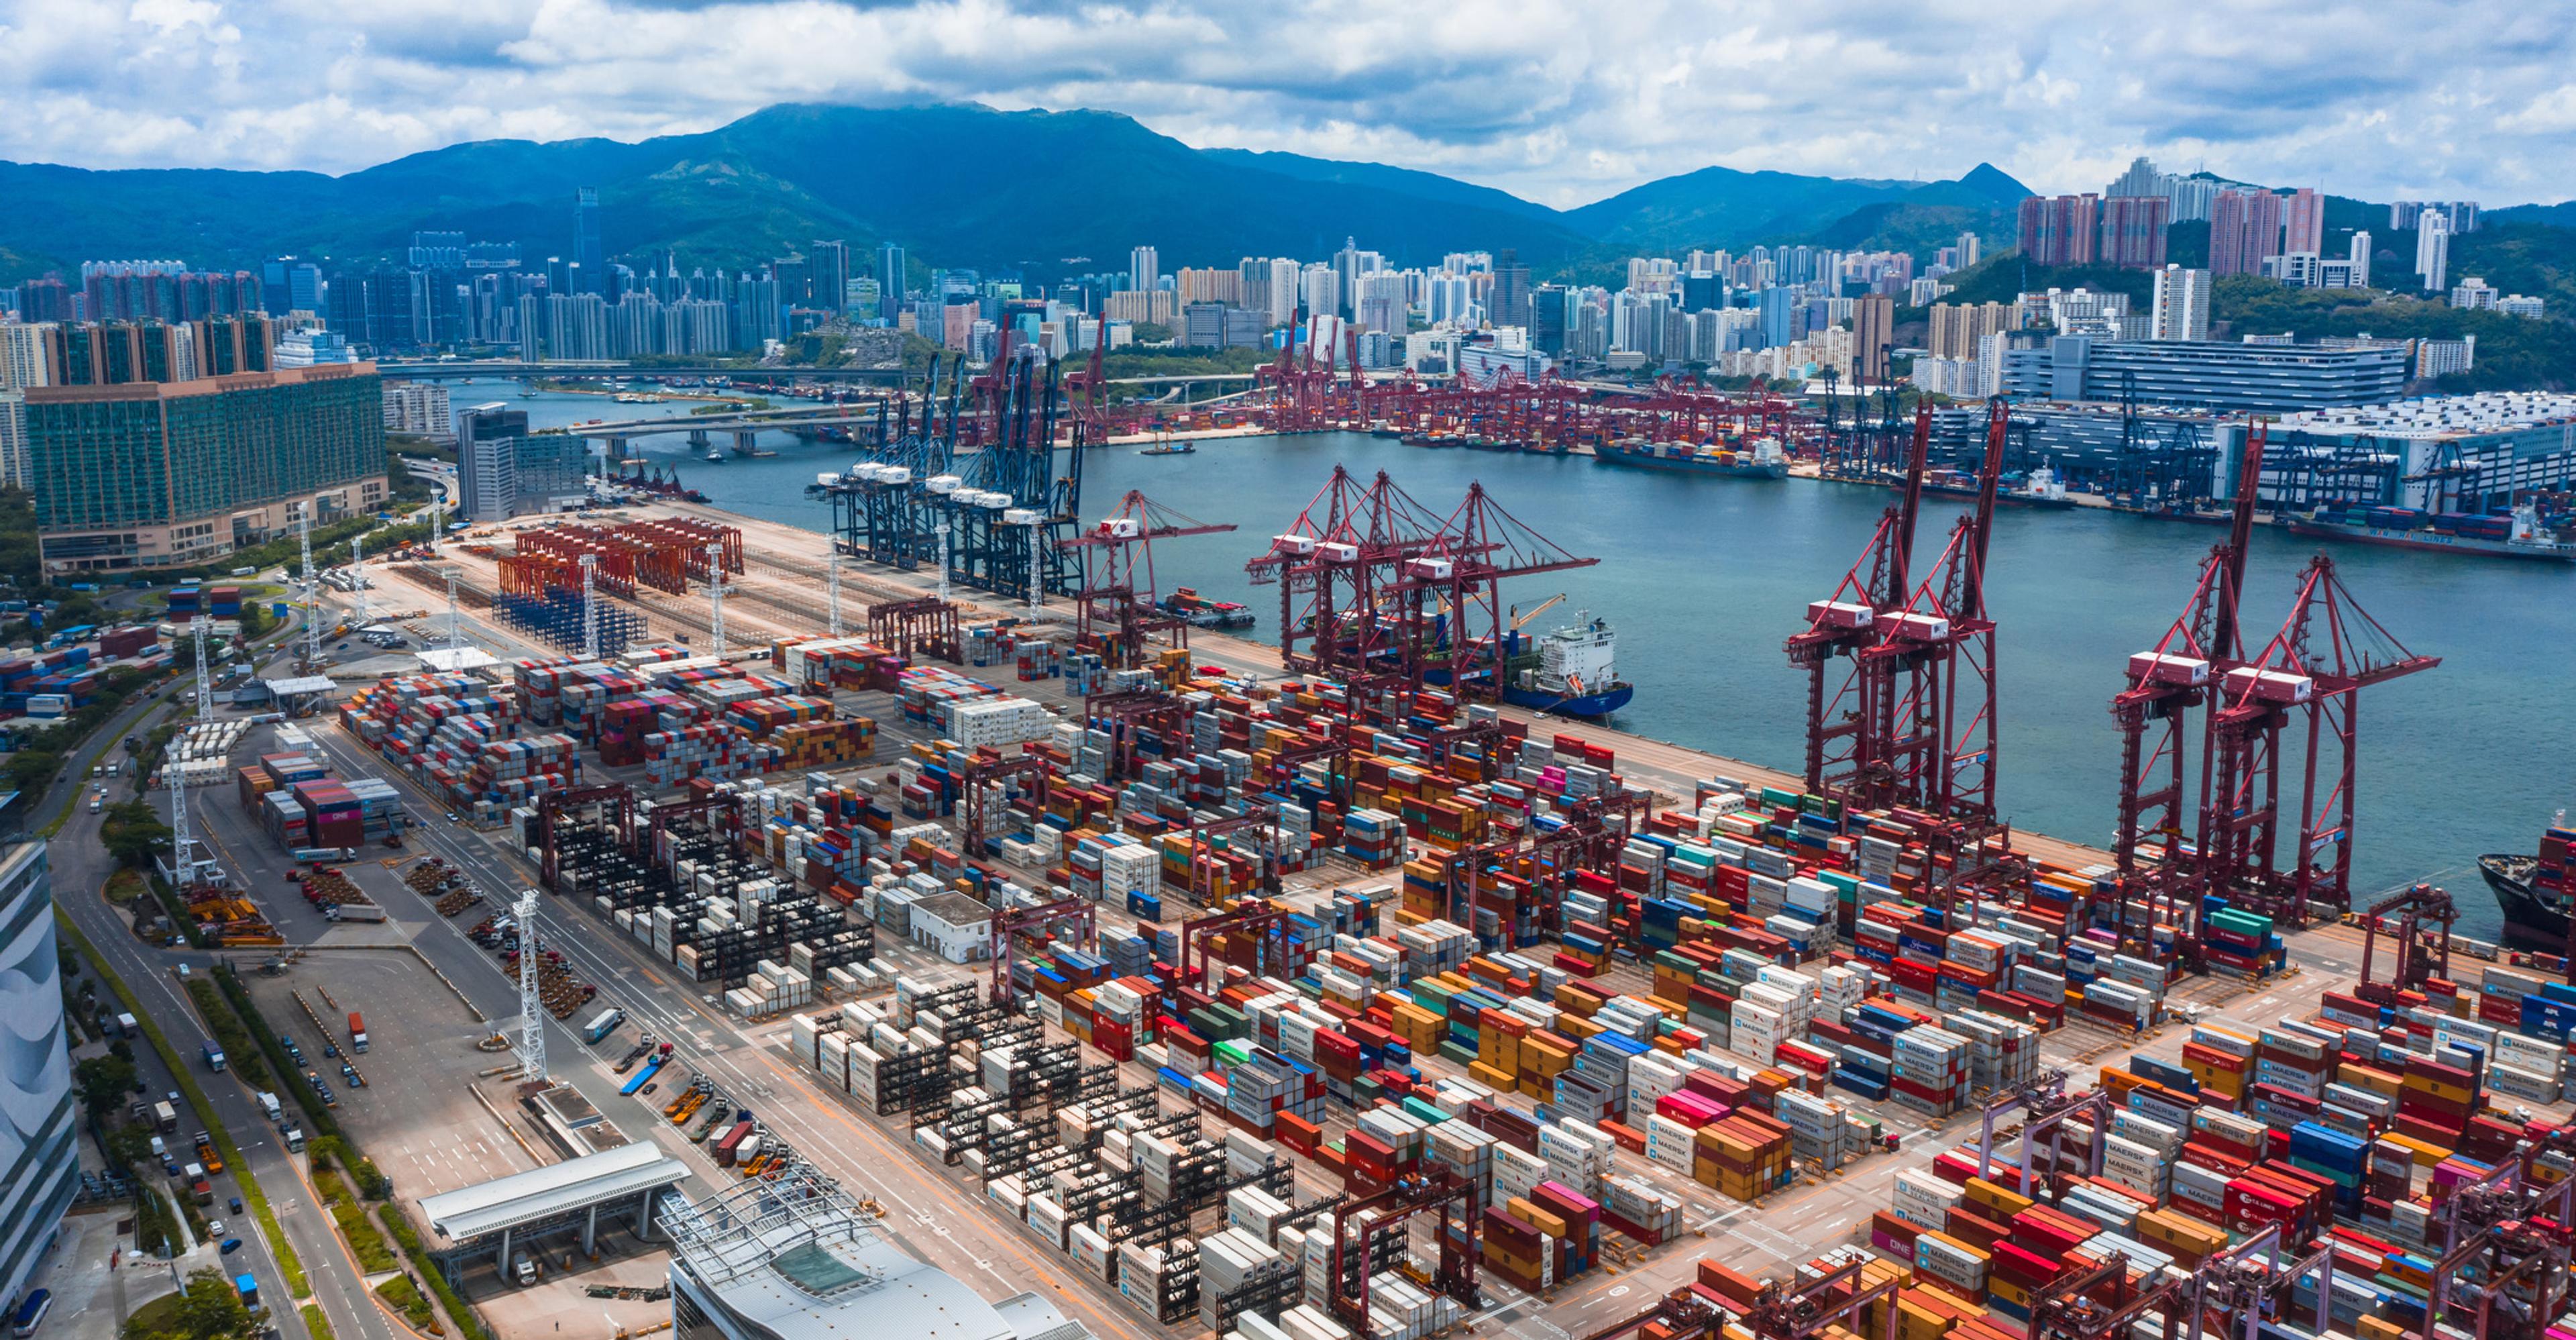 Aerial view of unloaded containers waiting at a port.